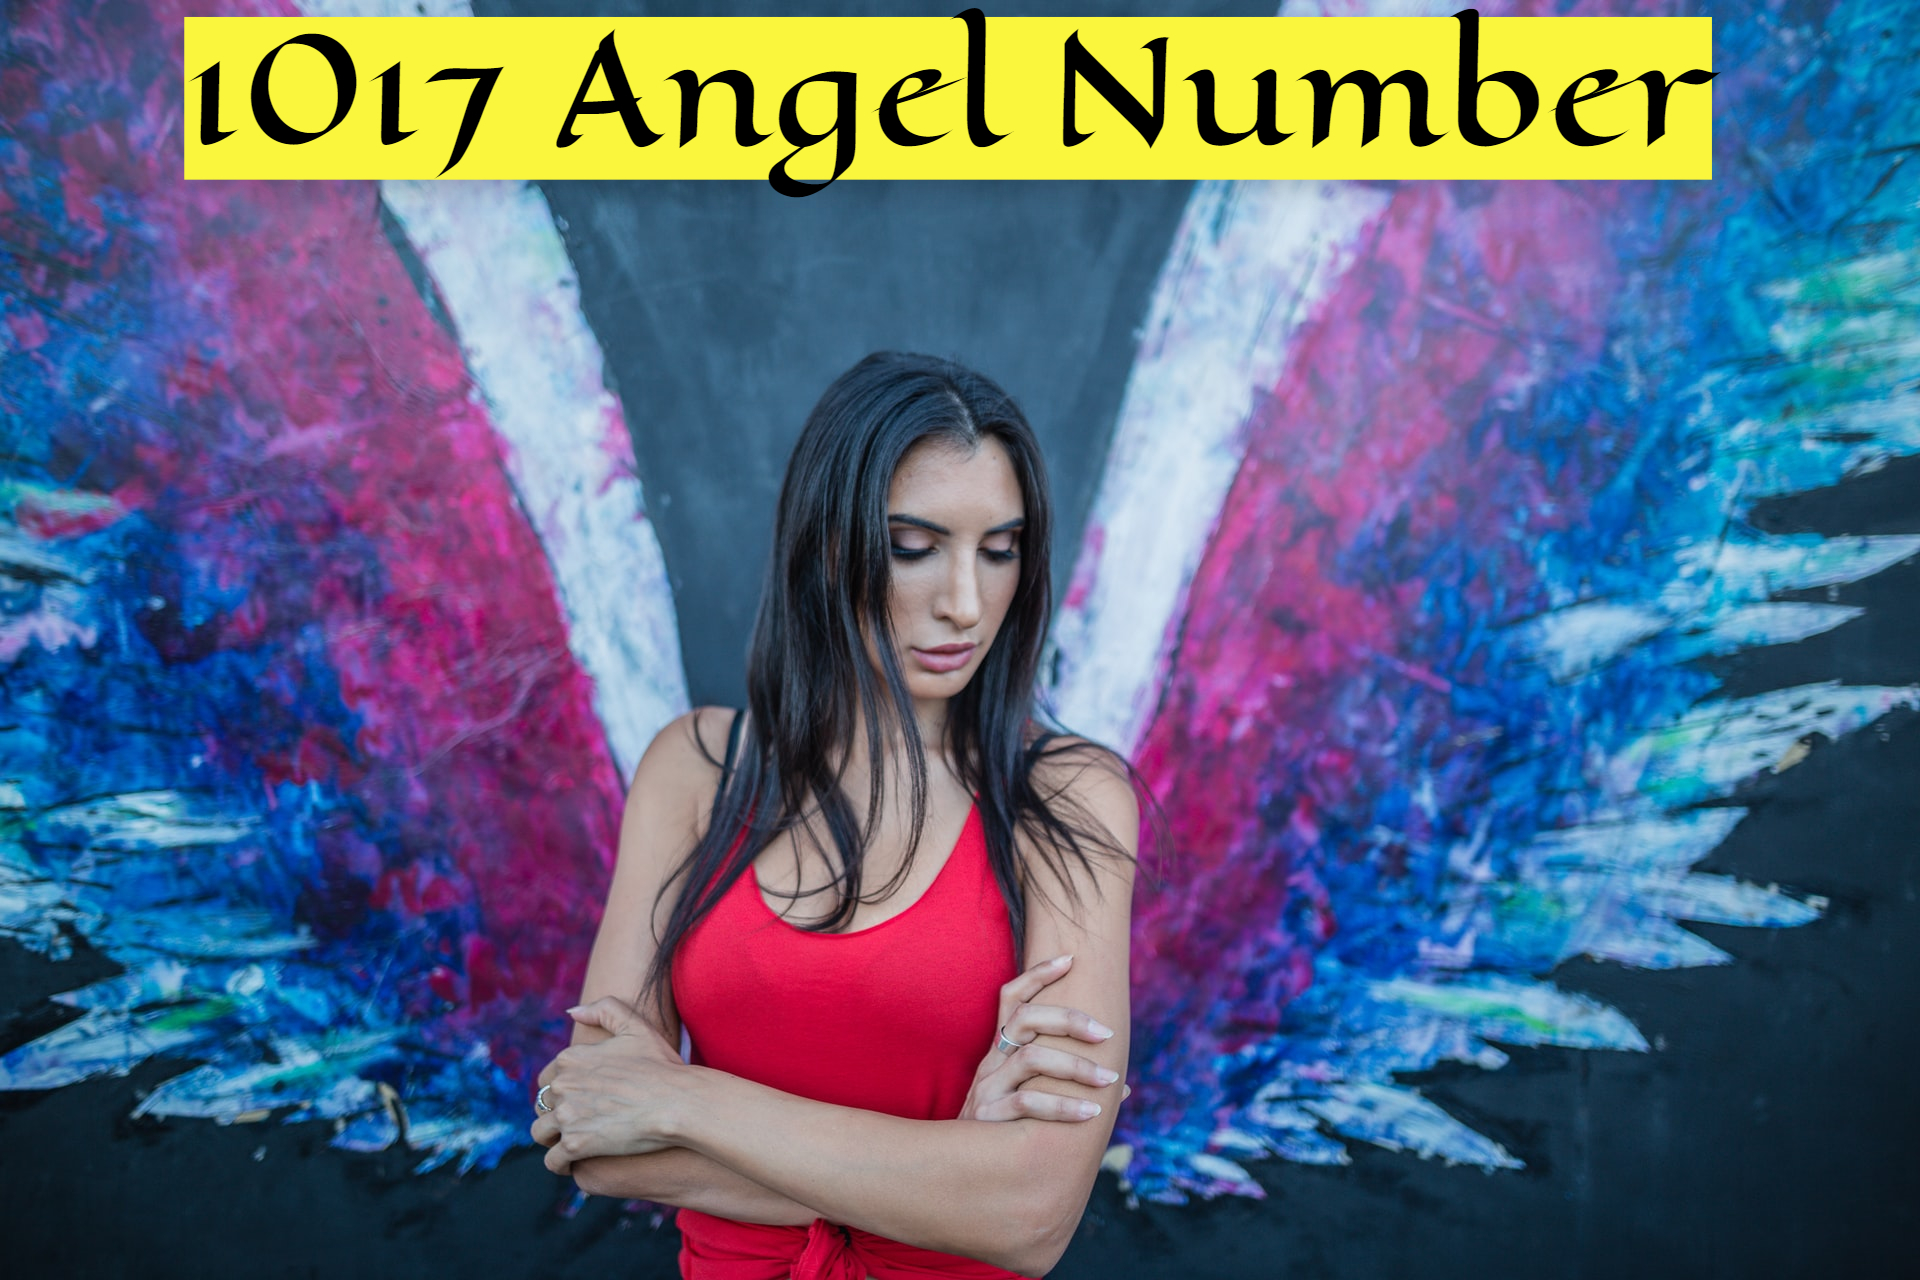 1017 Angel Number Signifies Decision-Making Processes